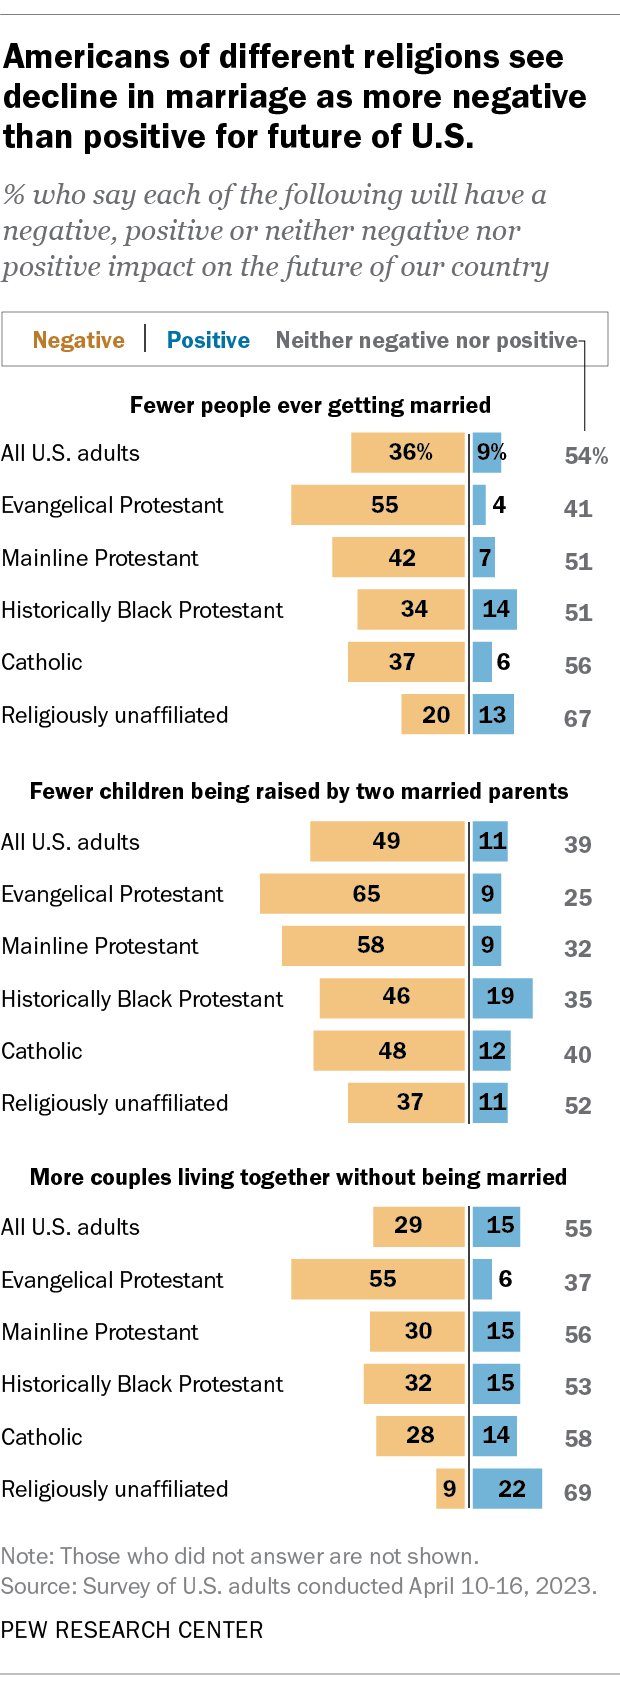 A bar chart showing that Americans of different religions see decline in marriage as more negative than positive for future of U.S.